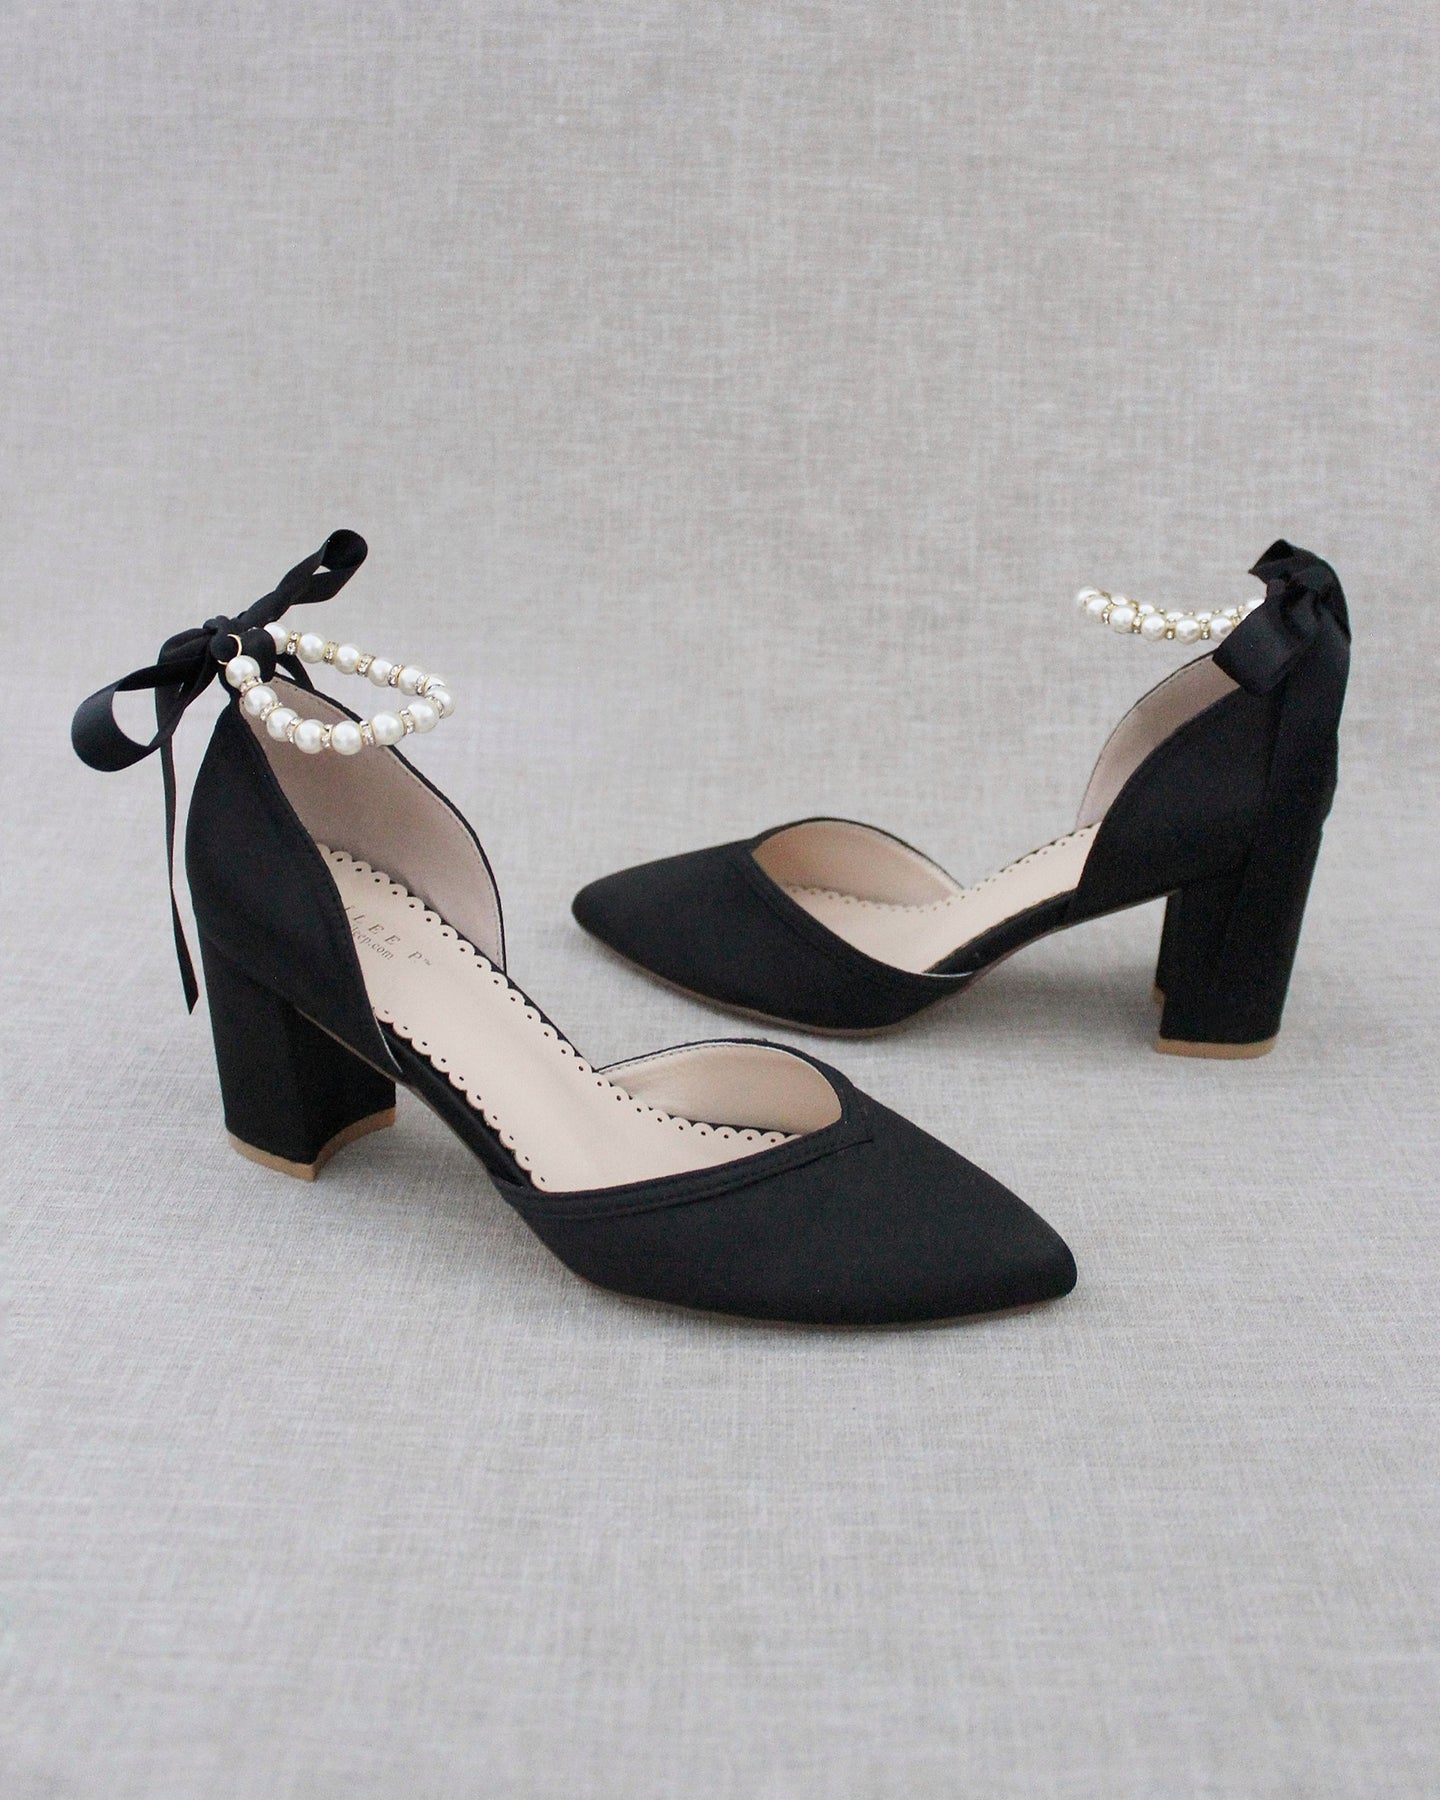 BLOCK HEELS ANKLE STRAP SANDALS 2 INCHES KOREAN FASHION NEW ARRIVAL #cssy1  Ladies 2inches Formal &